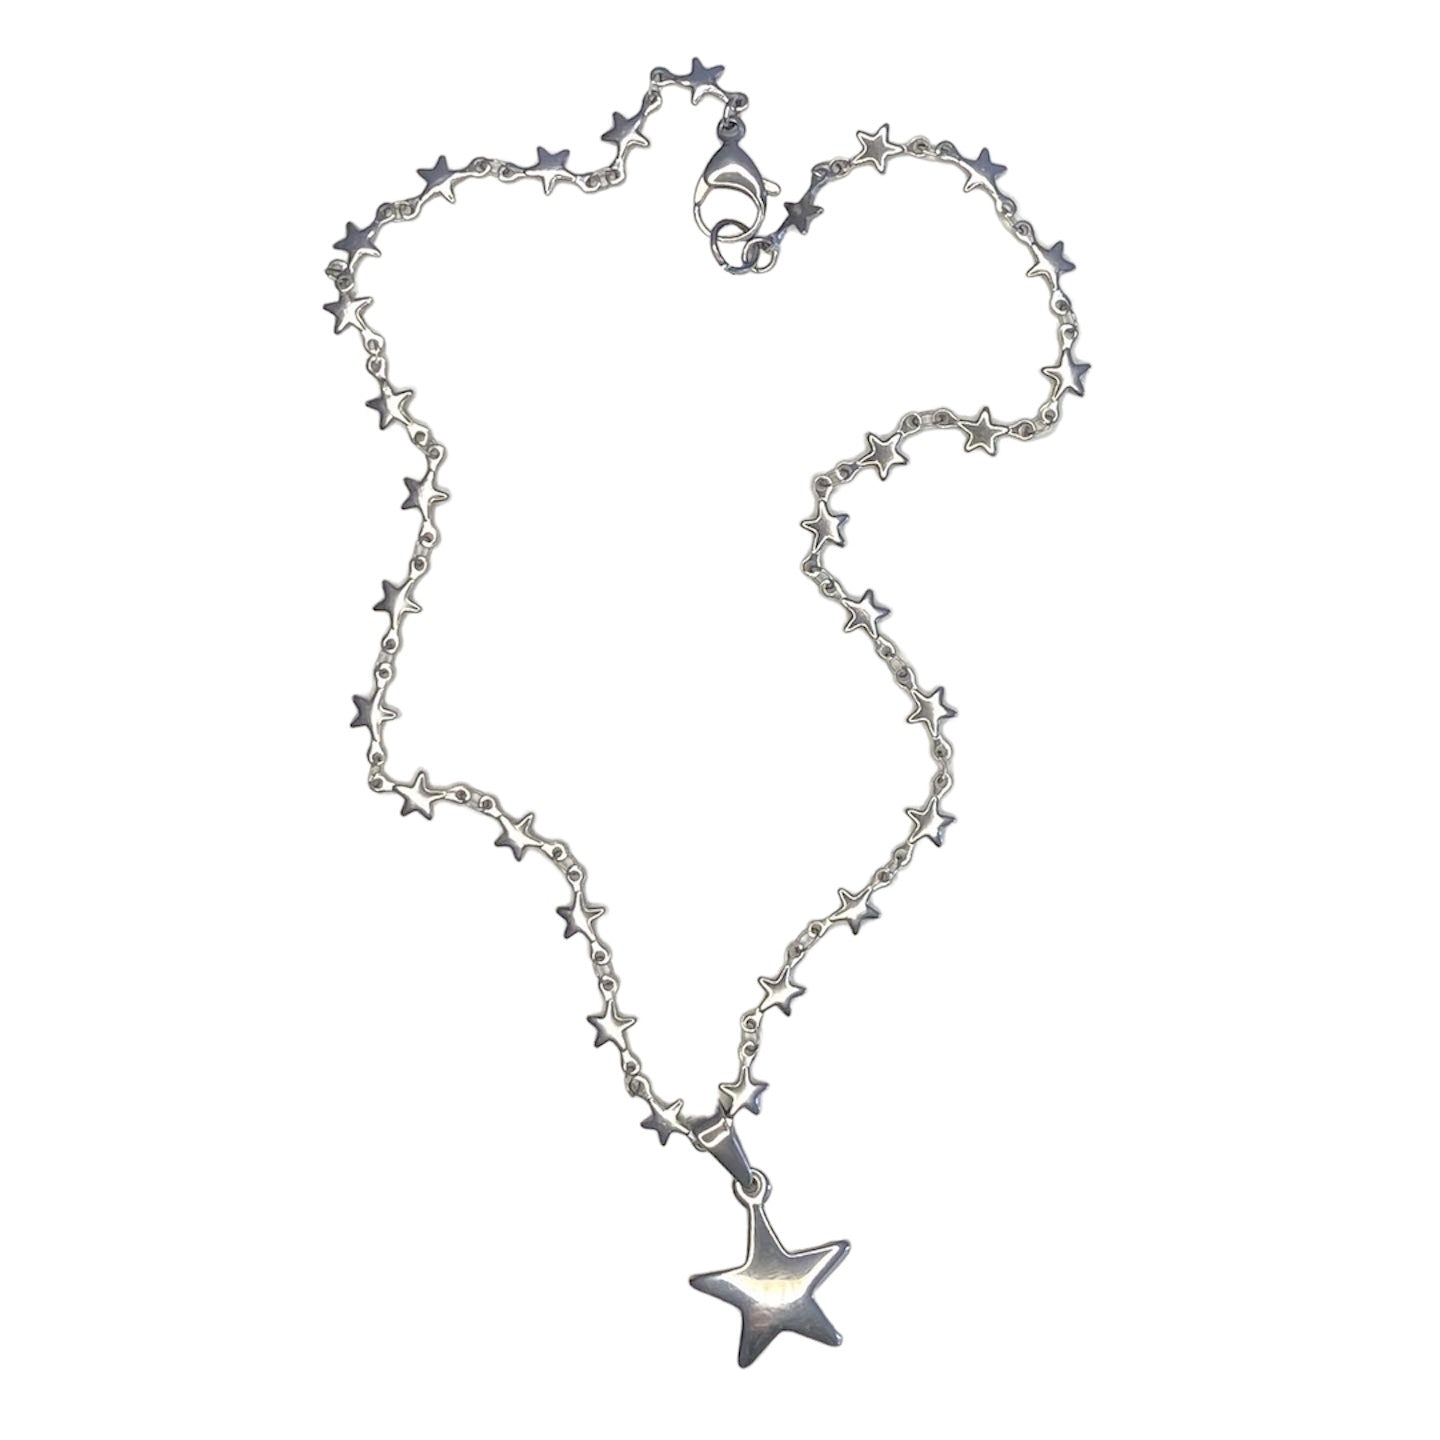 Cosmic Star necklace